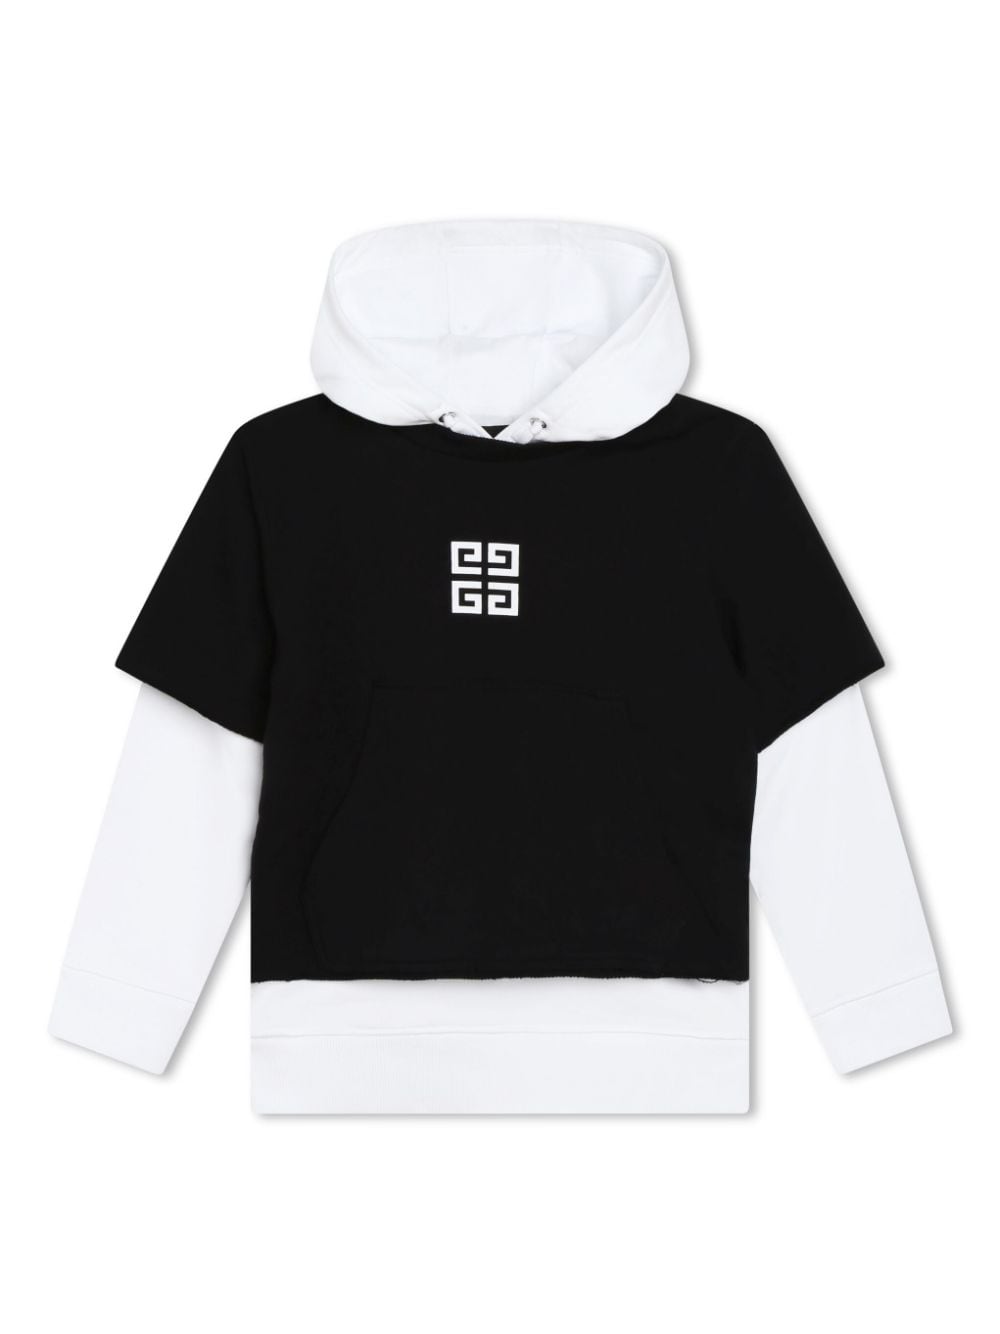 White and black sweatshirt for boys with logo